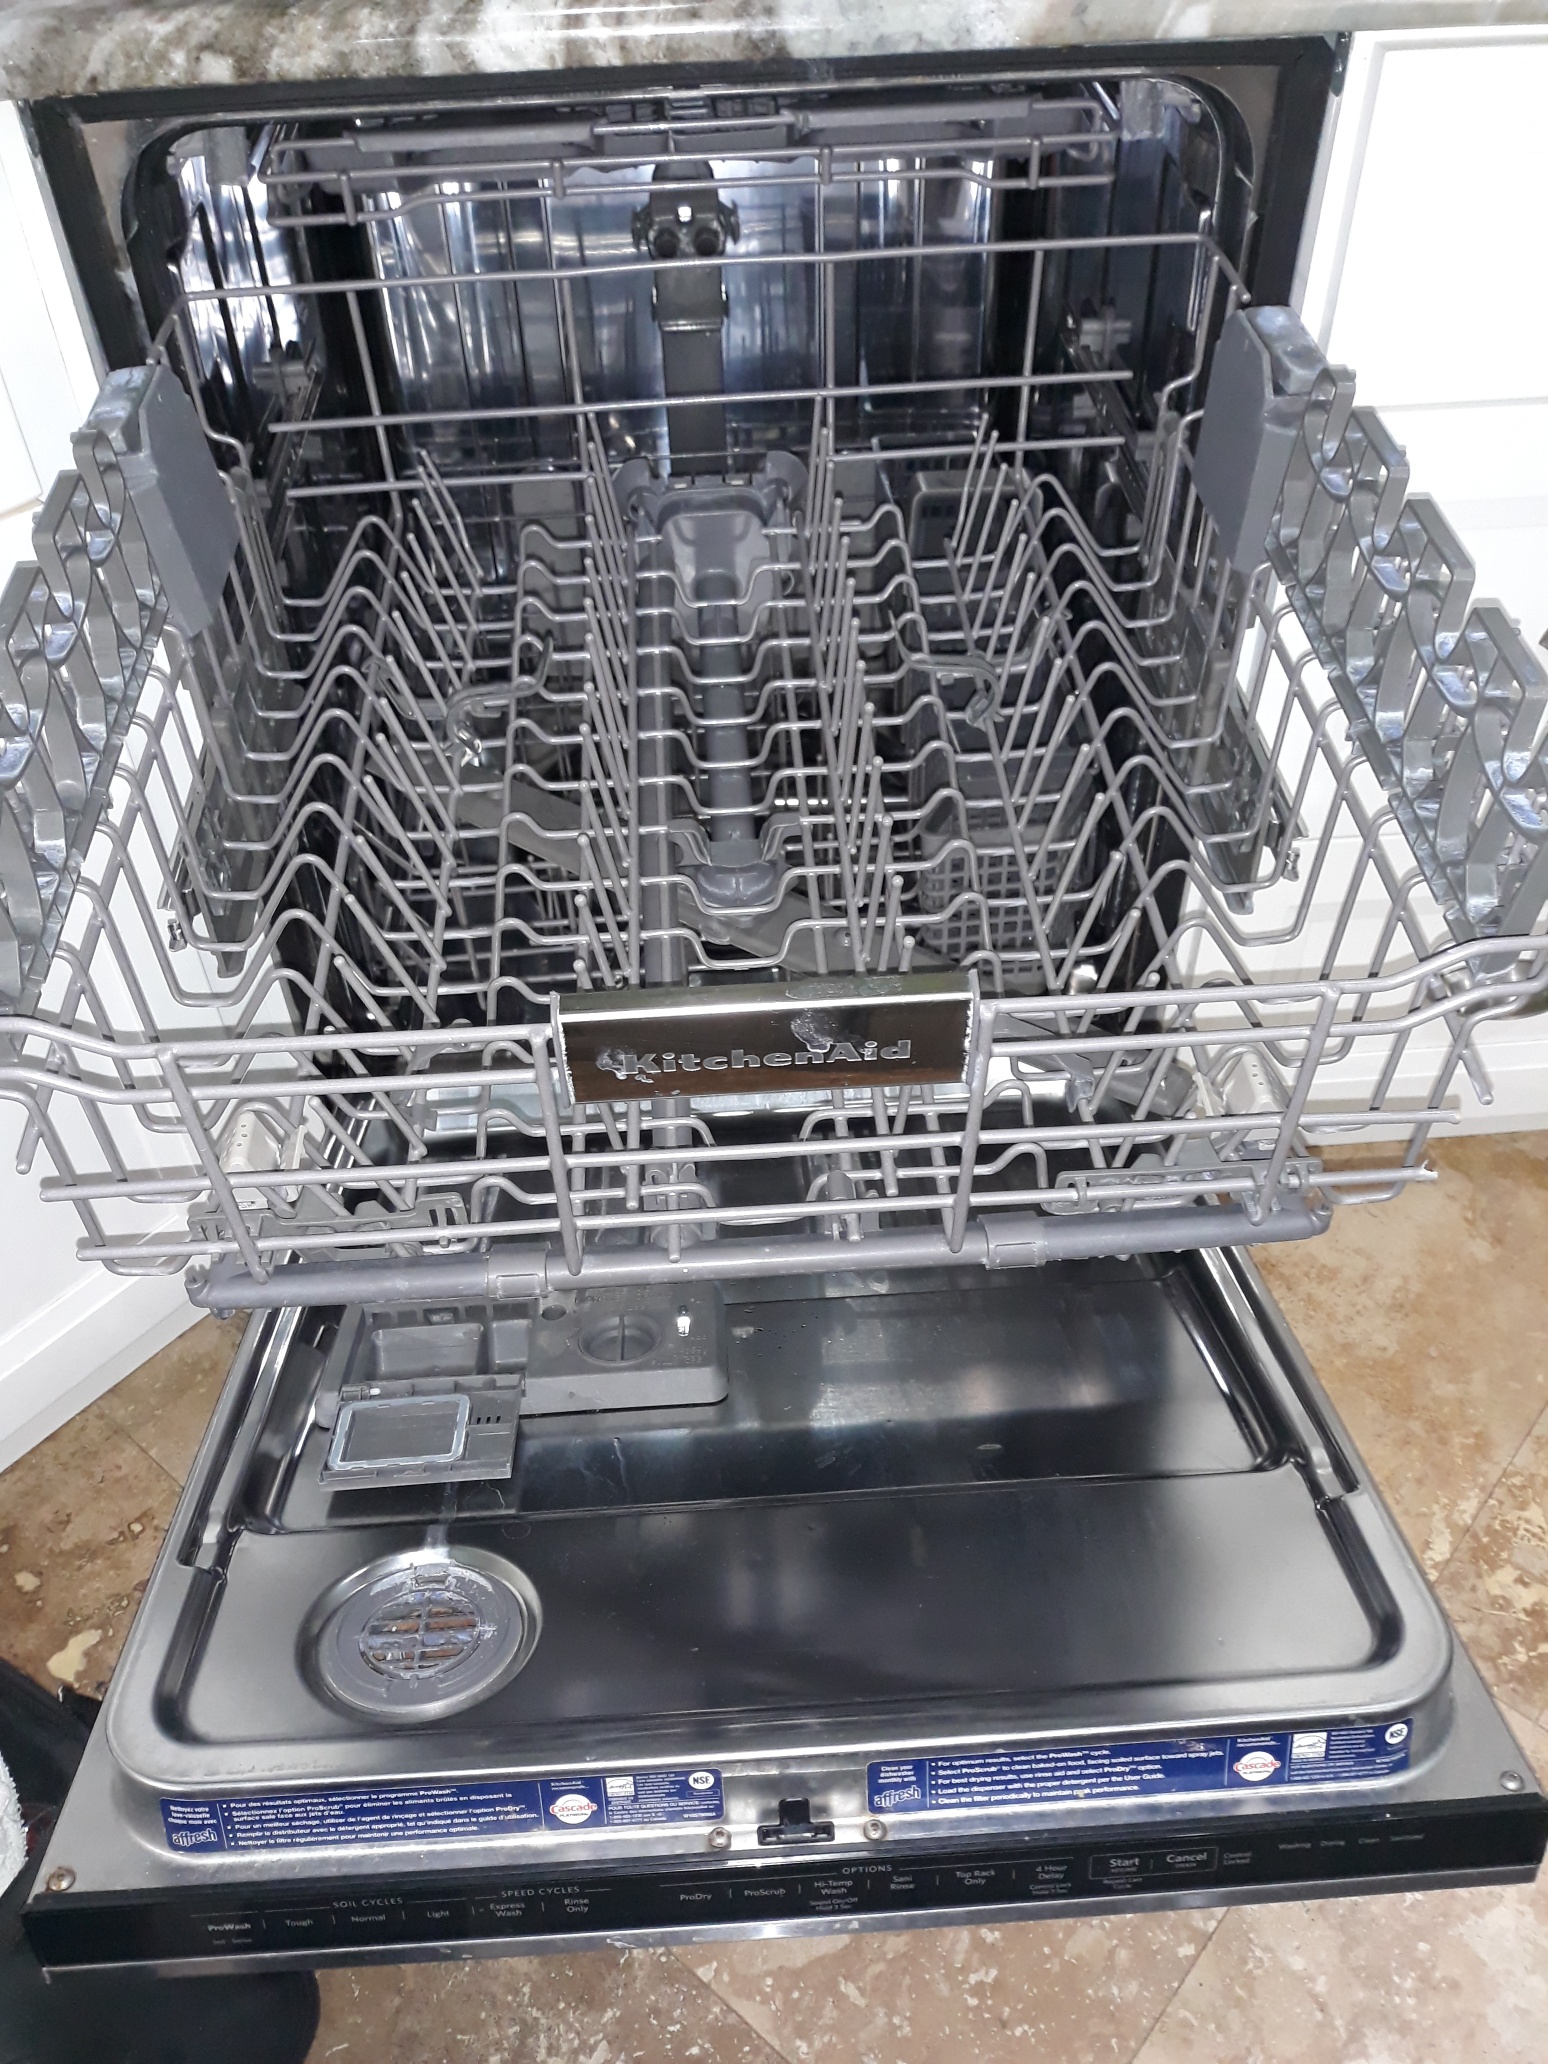 appliance repair dishwasher repair replacement of several damaged and missing parts to reassemble magnolia ave okahumpka fl 34762